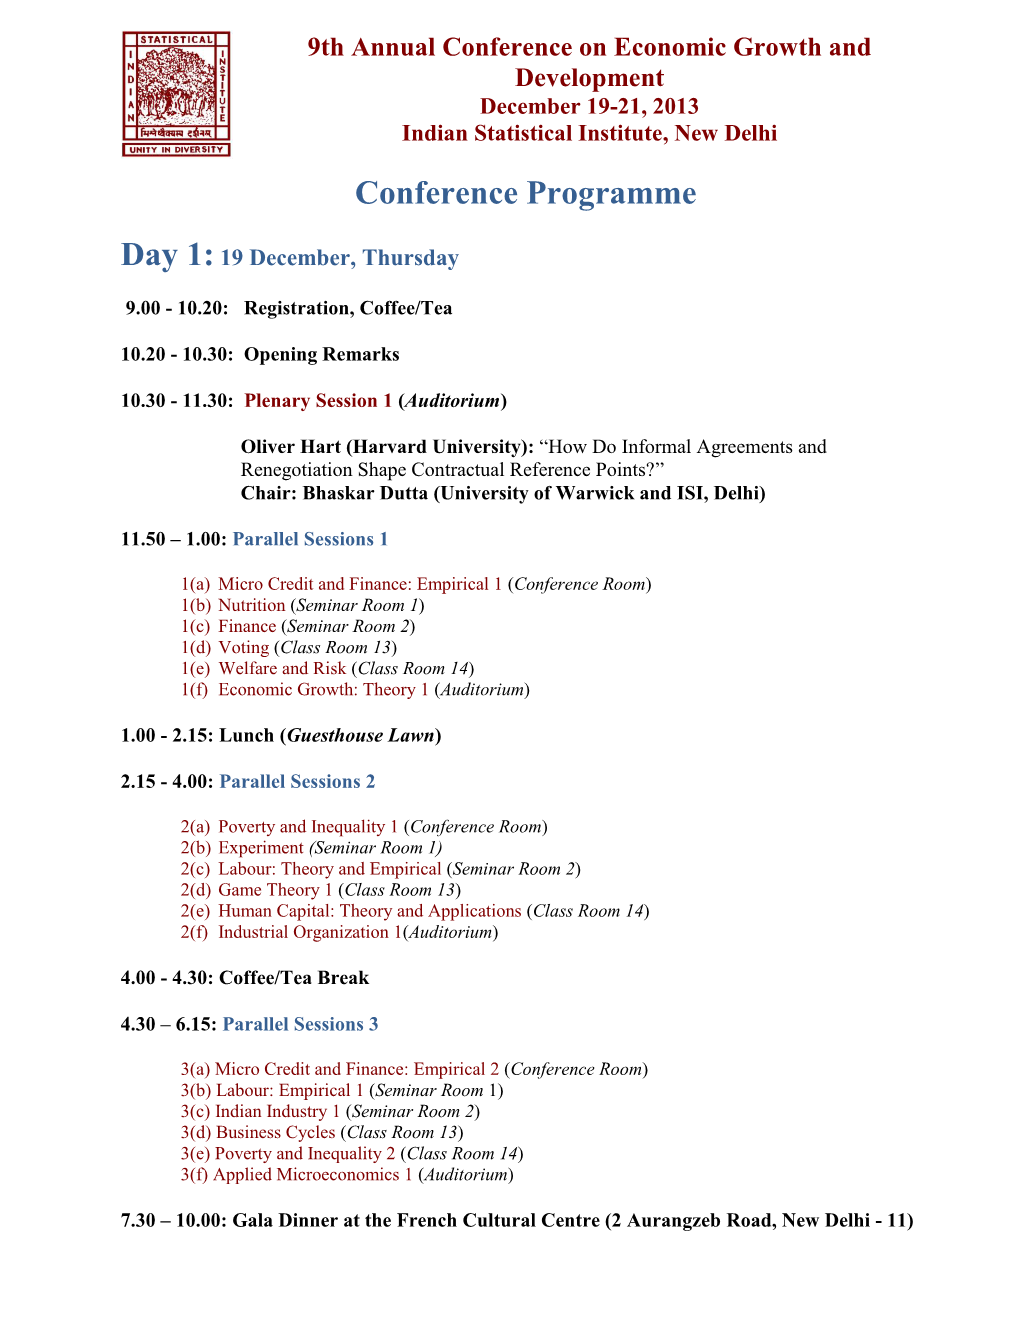 9Th Annual Conference on Economic Growth and Development December 19-21, 2013 Indian Statistical Institute, New Delhi